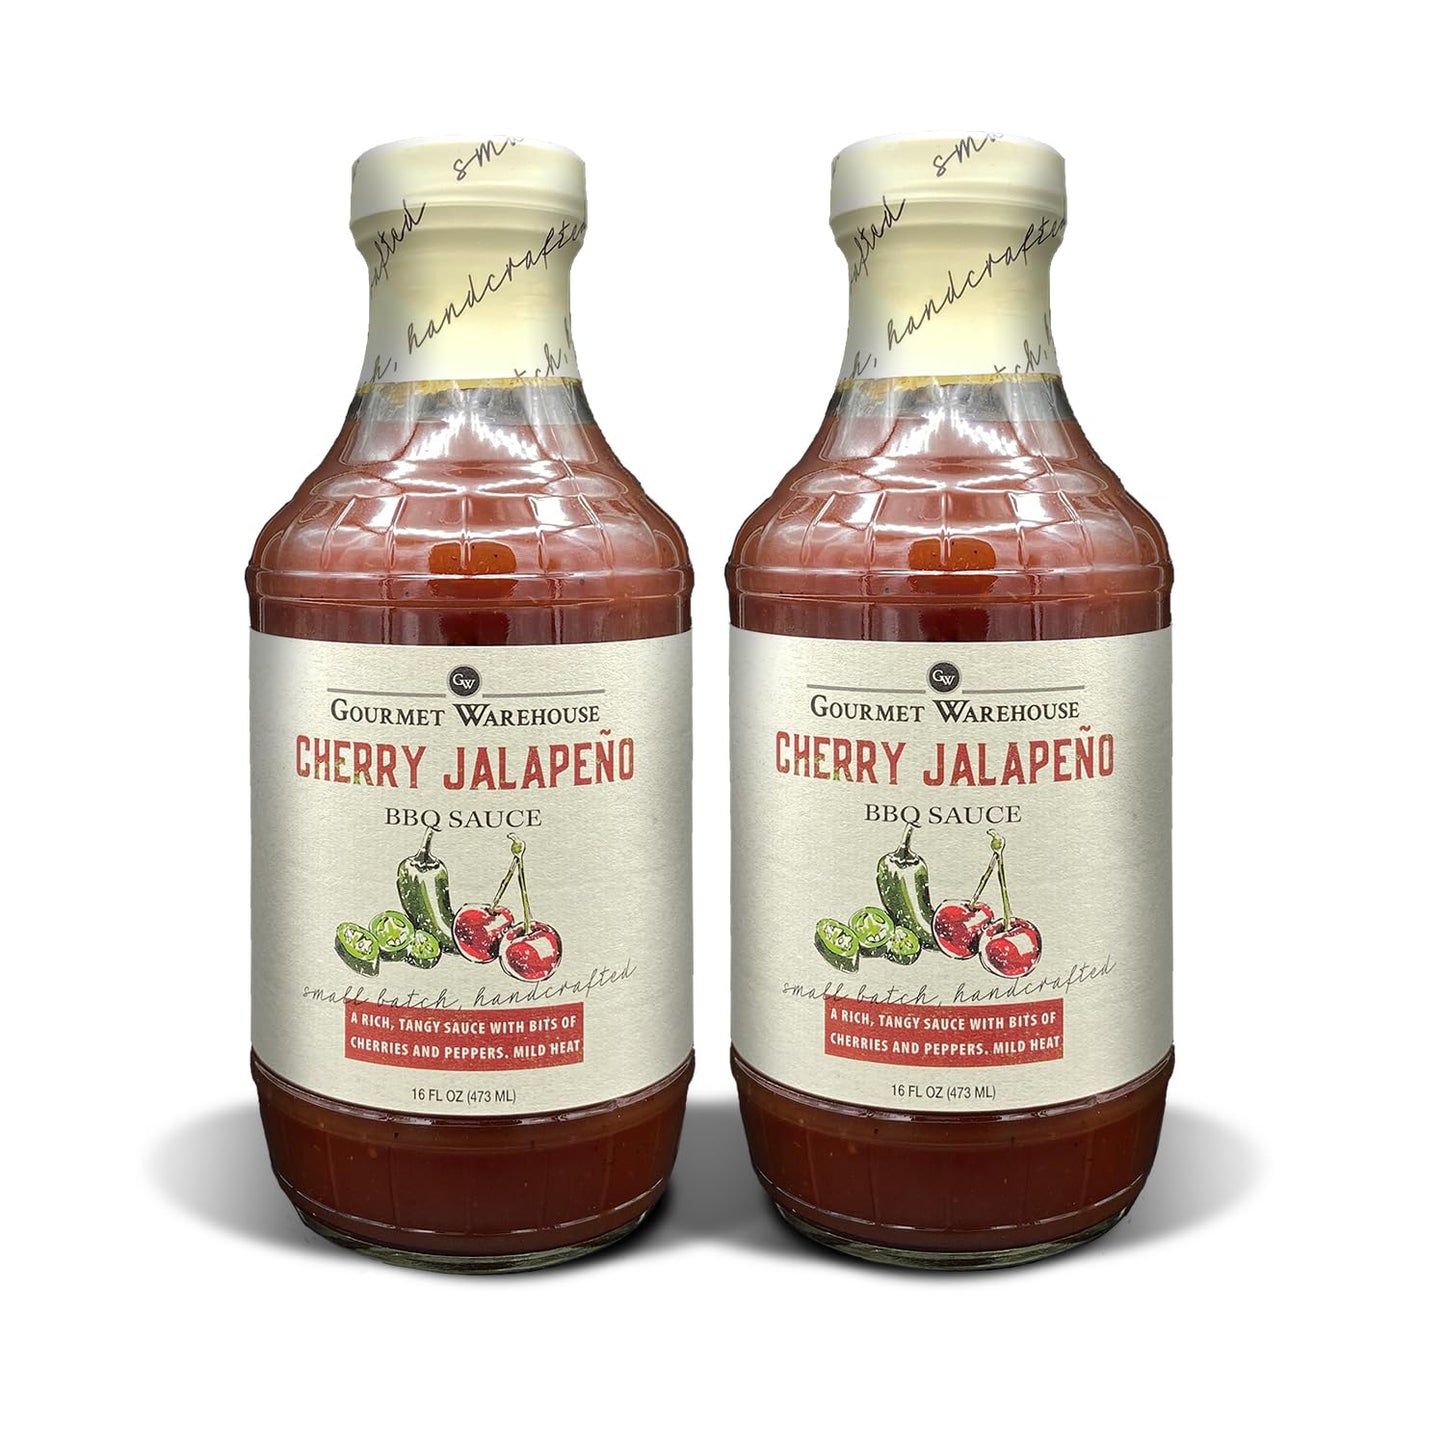 Gourmet Warehouse Cherry Jalapeno BBQ Sauce, Premium Barbecue Sauces Handcrafted In Small Batches Gluten-Free, HFCS-Free, Delicious Sauce 16 Ounces Bottle (Pack of 2)